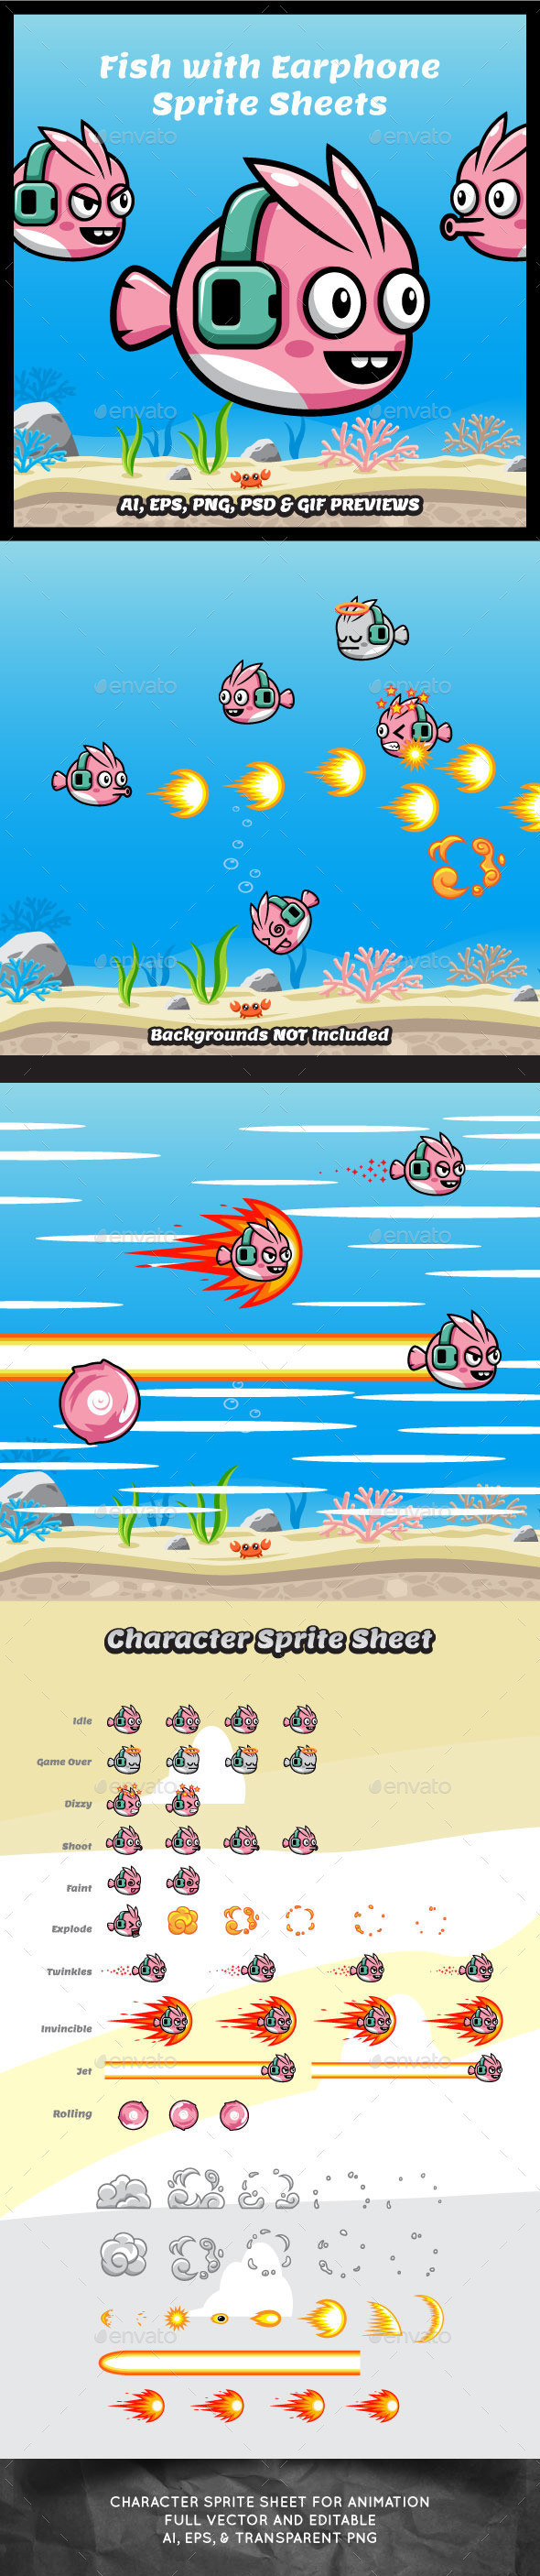 Fish with music earphone game character sprite sheet sidescroller game asset flying flappy animation gui mobile games gameart game art 590